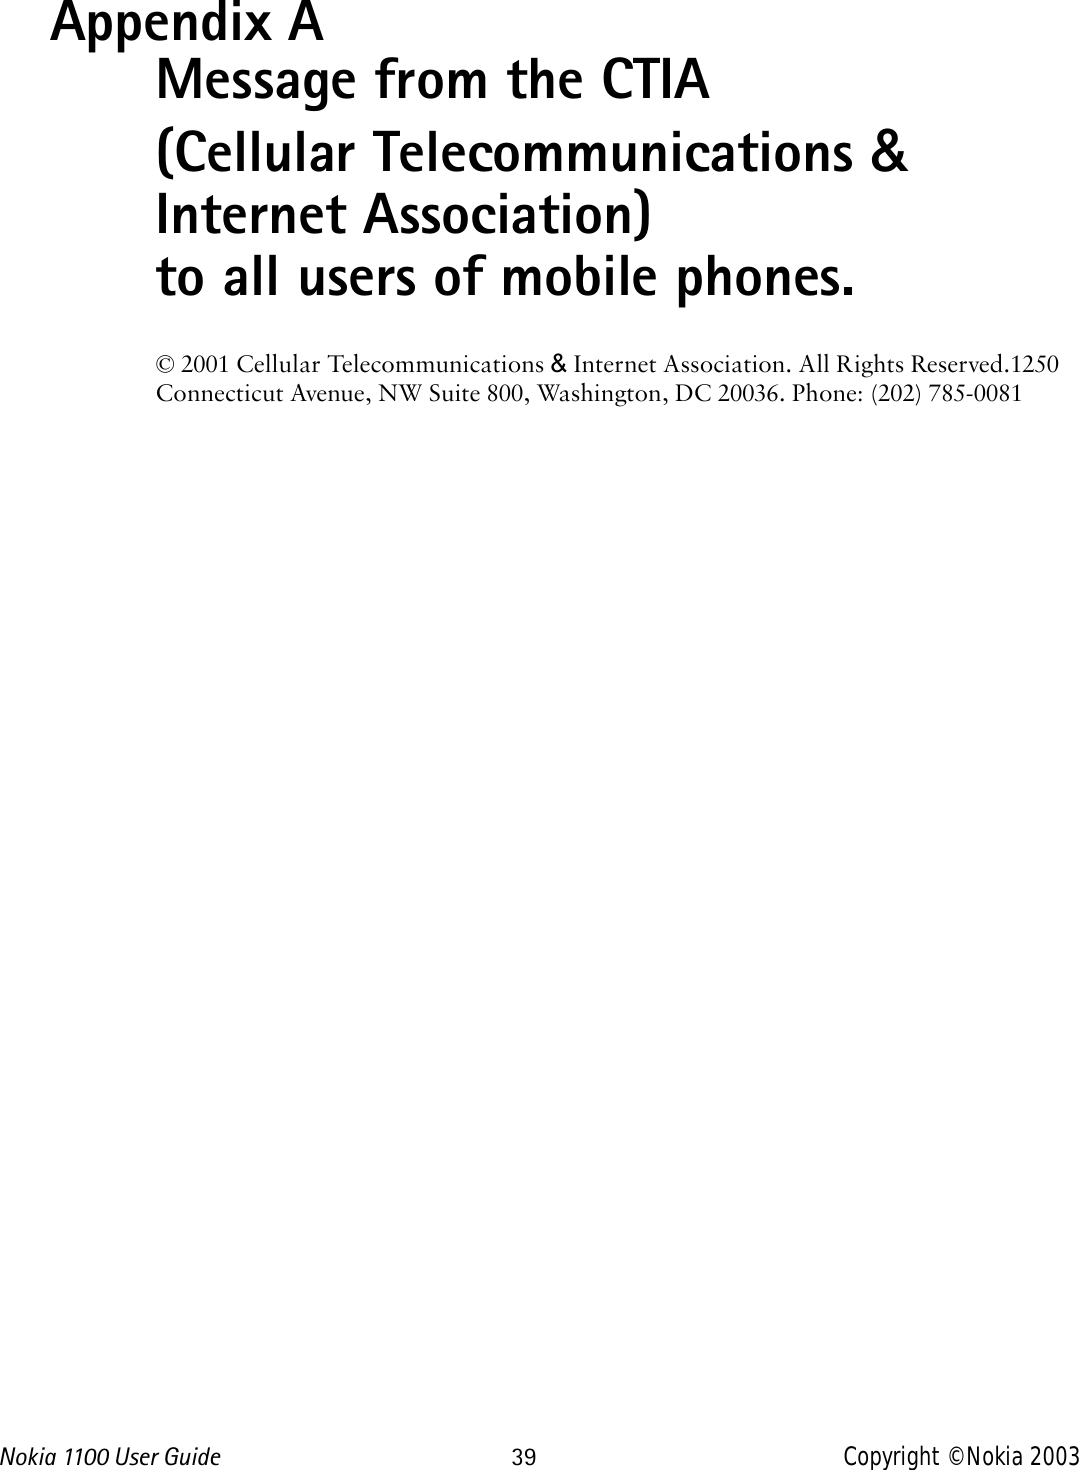 Nokia 1100 User Guide 39 Copyright © Nokia 2003Appendix A Message from the CTIA(Cellular Telecommunications &amp; Internet Association) to all users of mobile phones.© 2001 Cellular Telecommunications &amp; Internet Association. All Rights Reserved.1250 Connecticut Avenue, NW Suite 800, Washington, DC 20036. Phone: (202) 785-0081